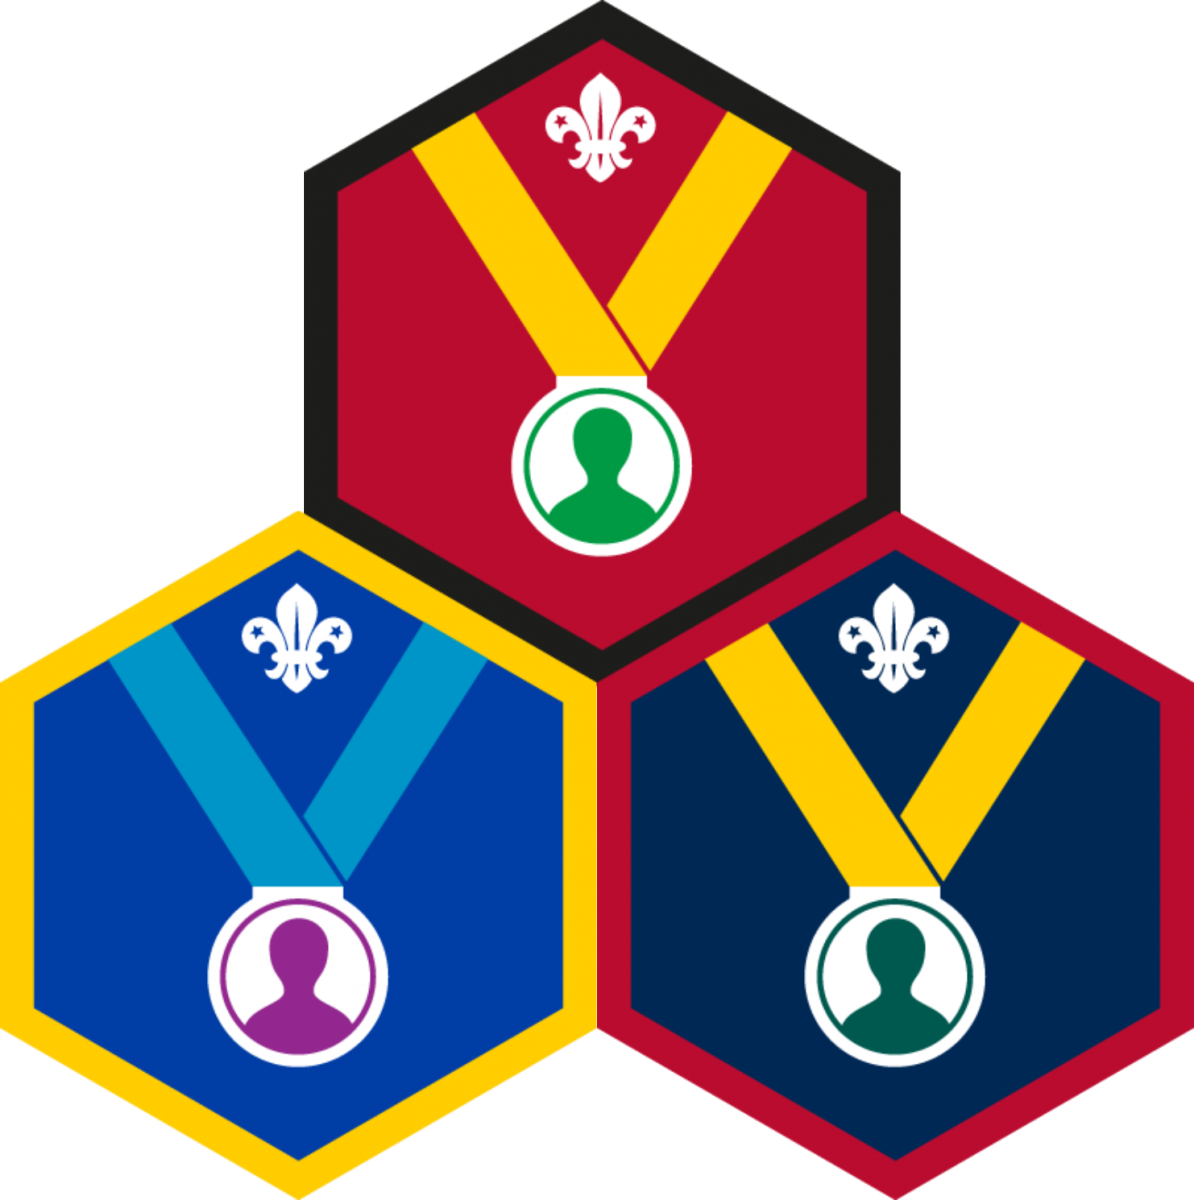 Personal Challenge Awards